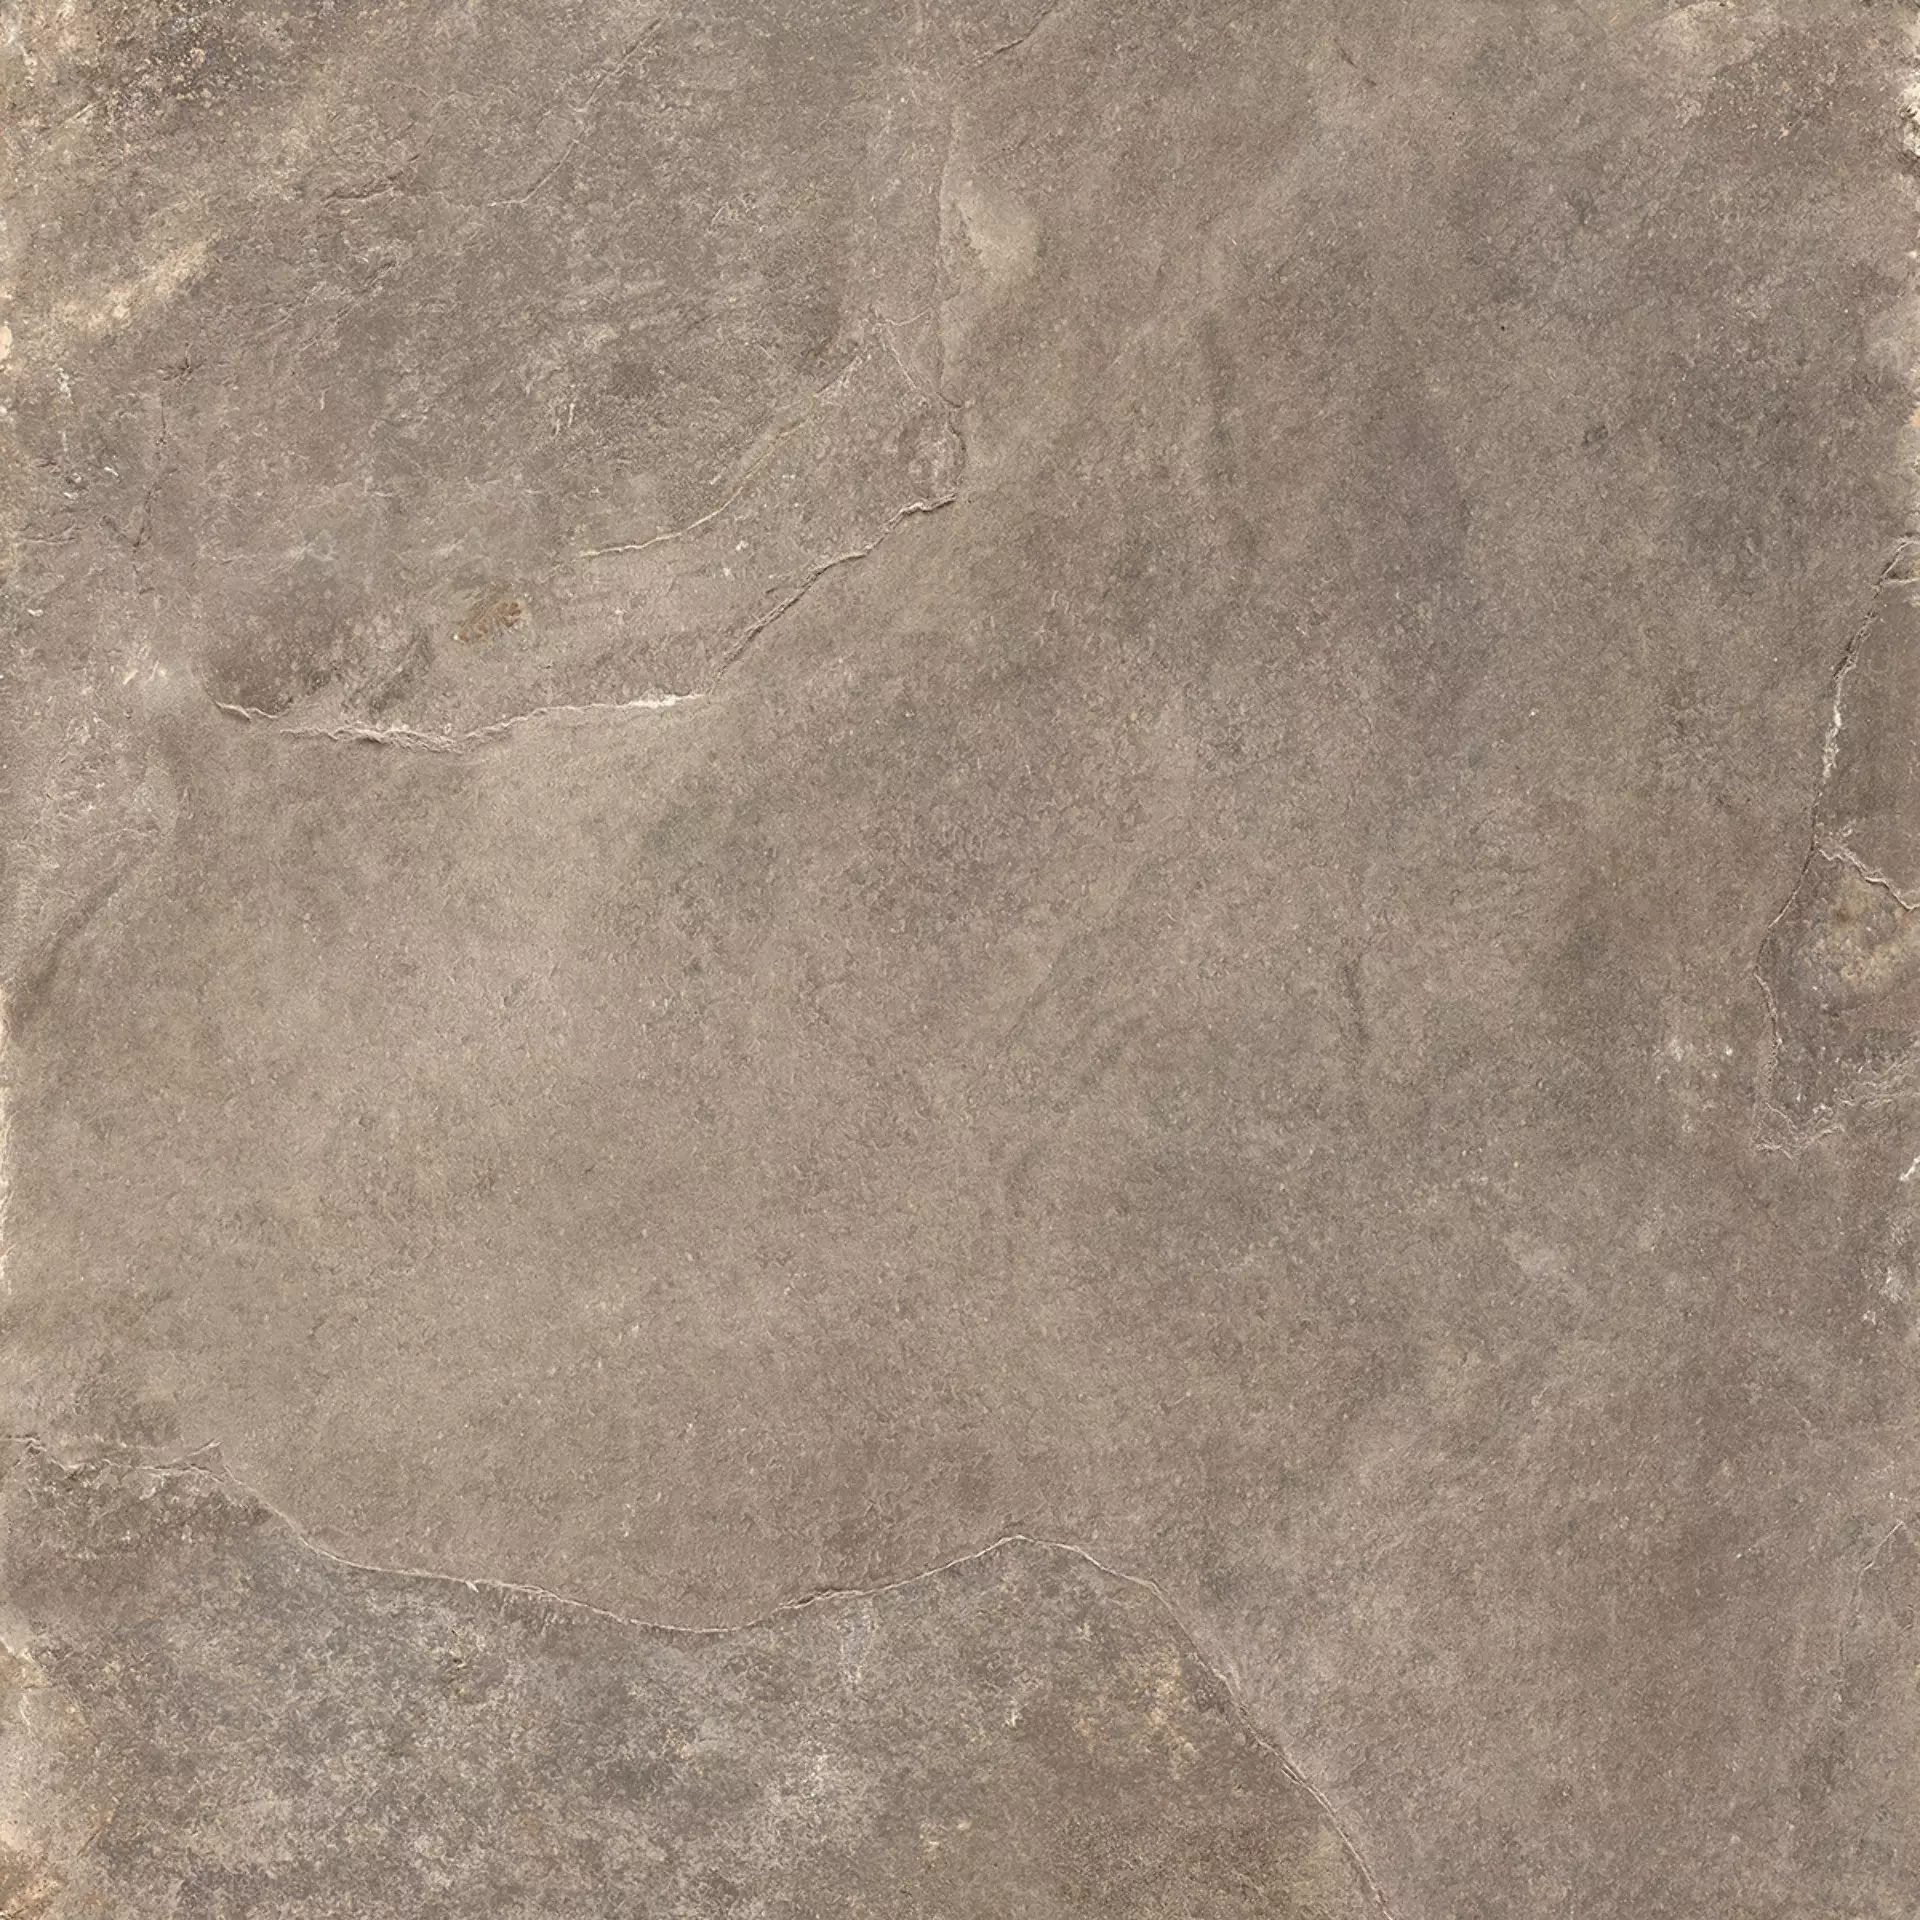 Rondine Ardesie Taupe Naturale J86992 60x60cm rectified 9,5mm